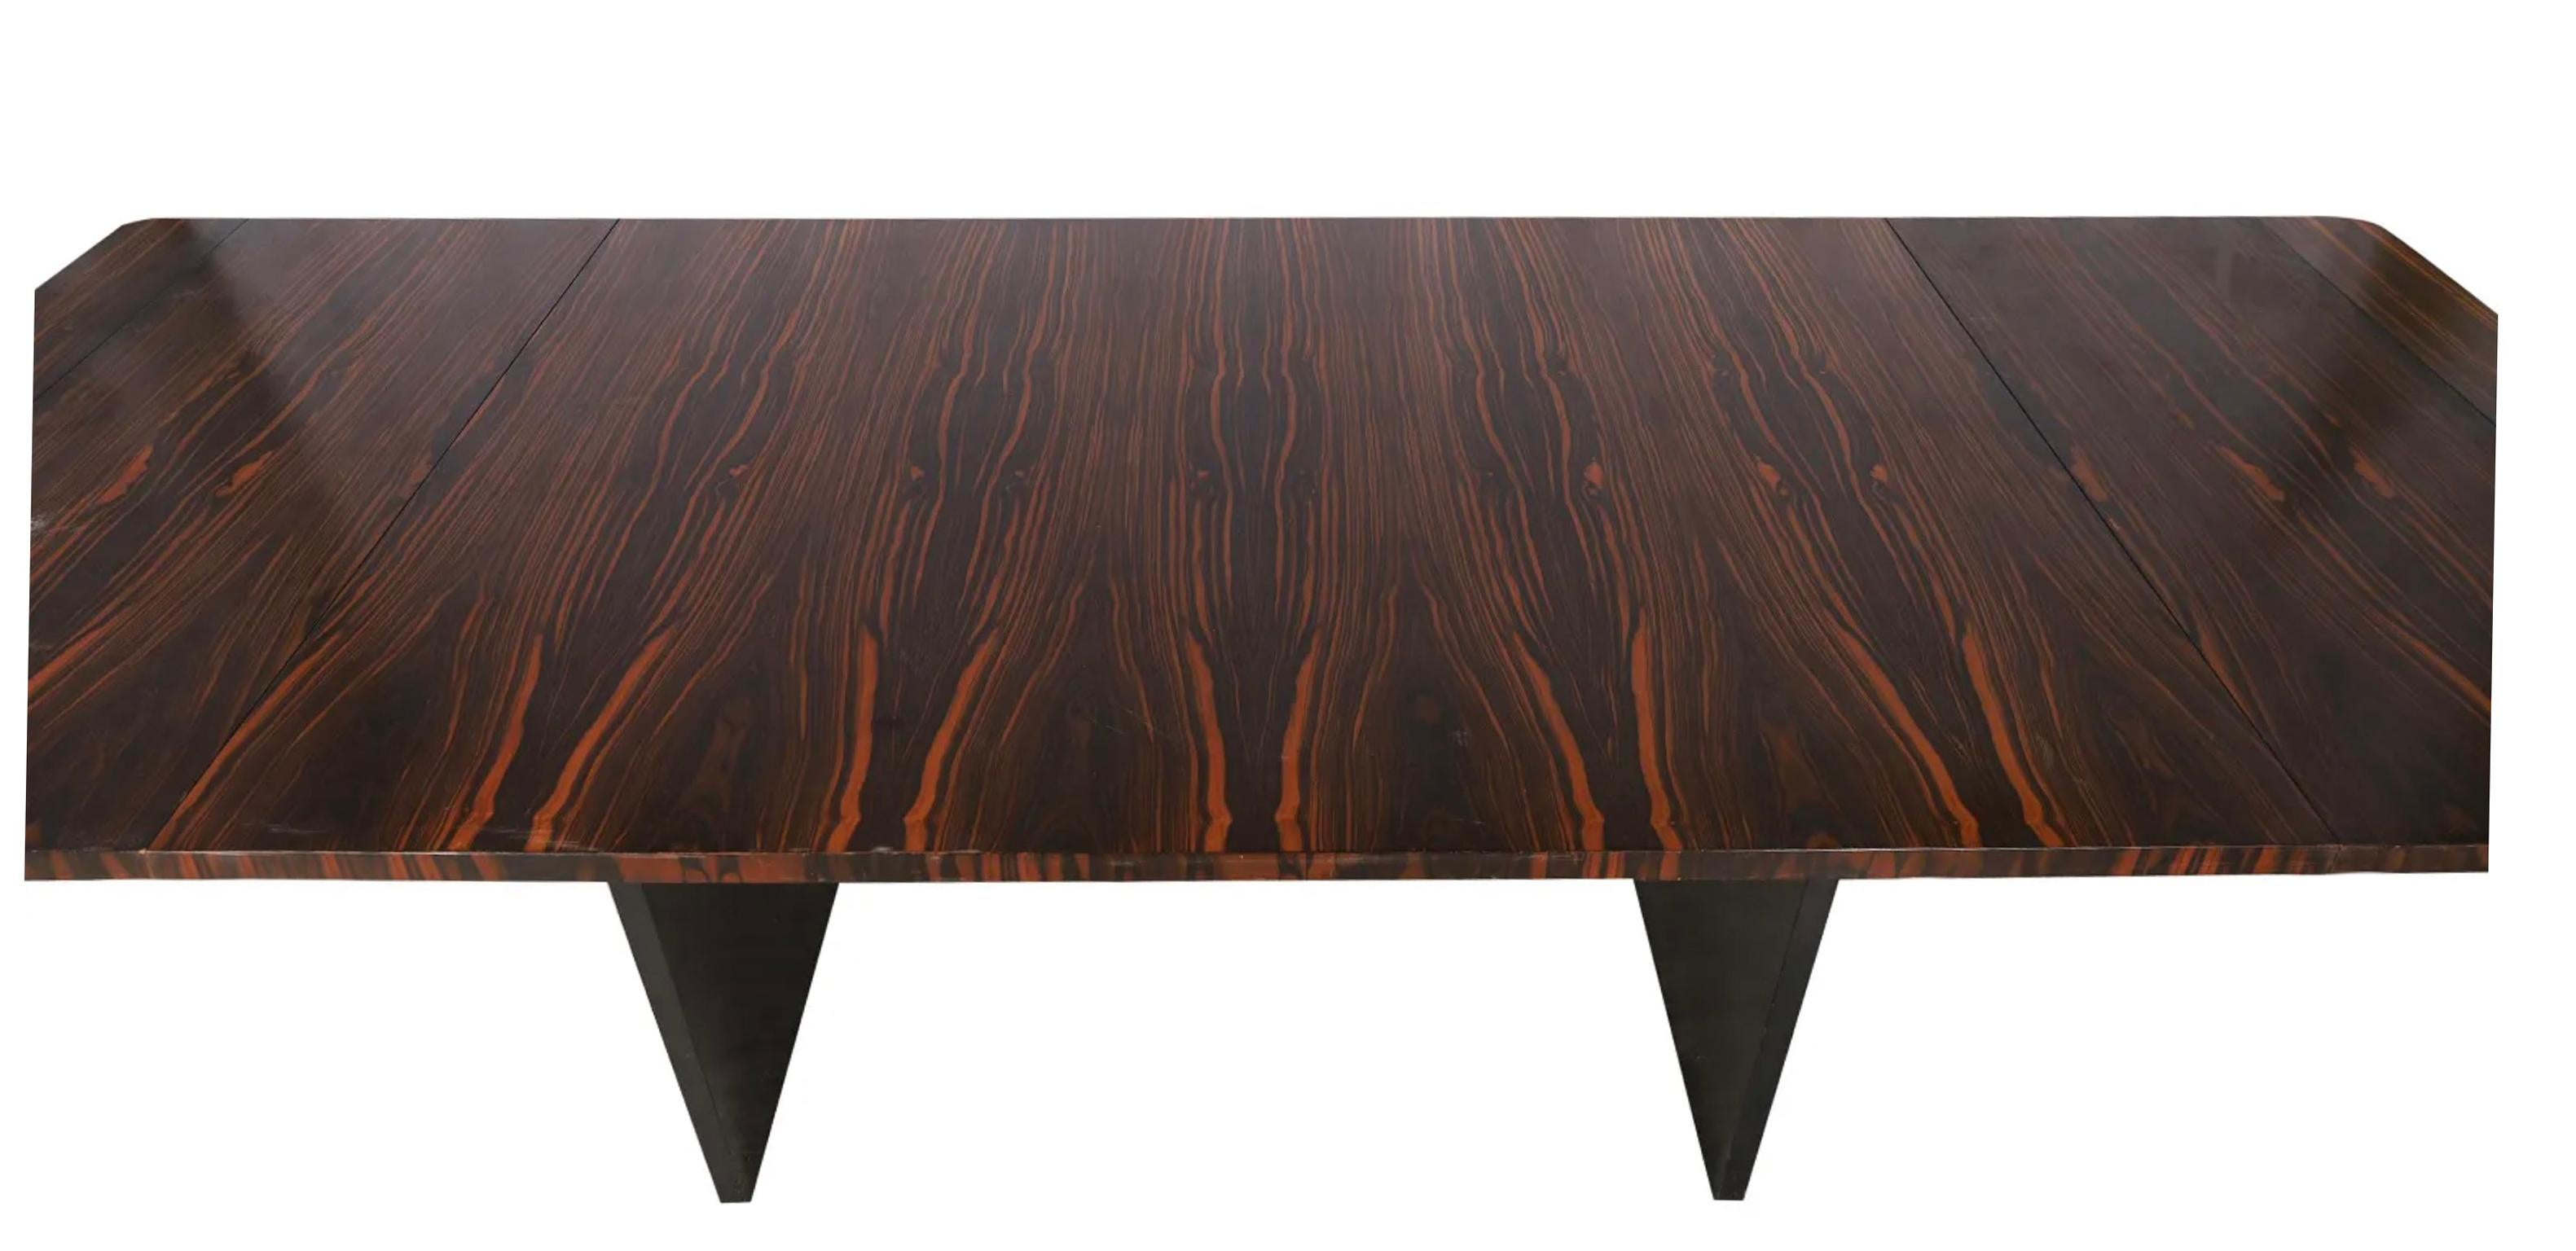 Danish Superb Midcentury Brazilian Rosewood Modern Extension Dining Table 2 Leaves For Sale